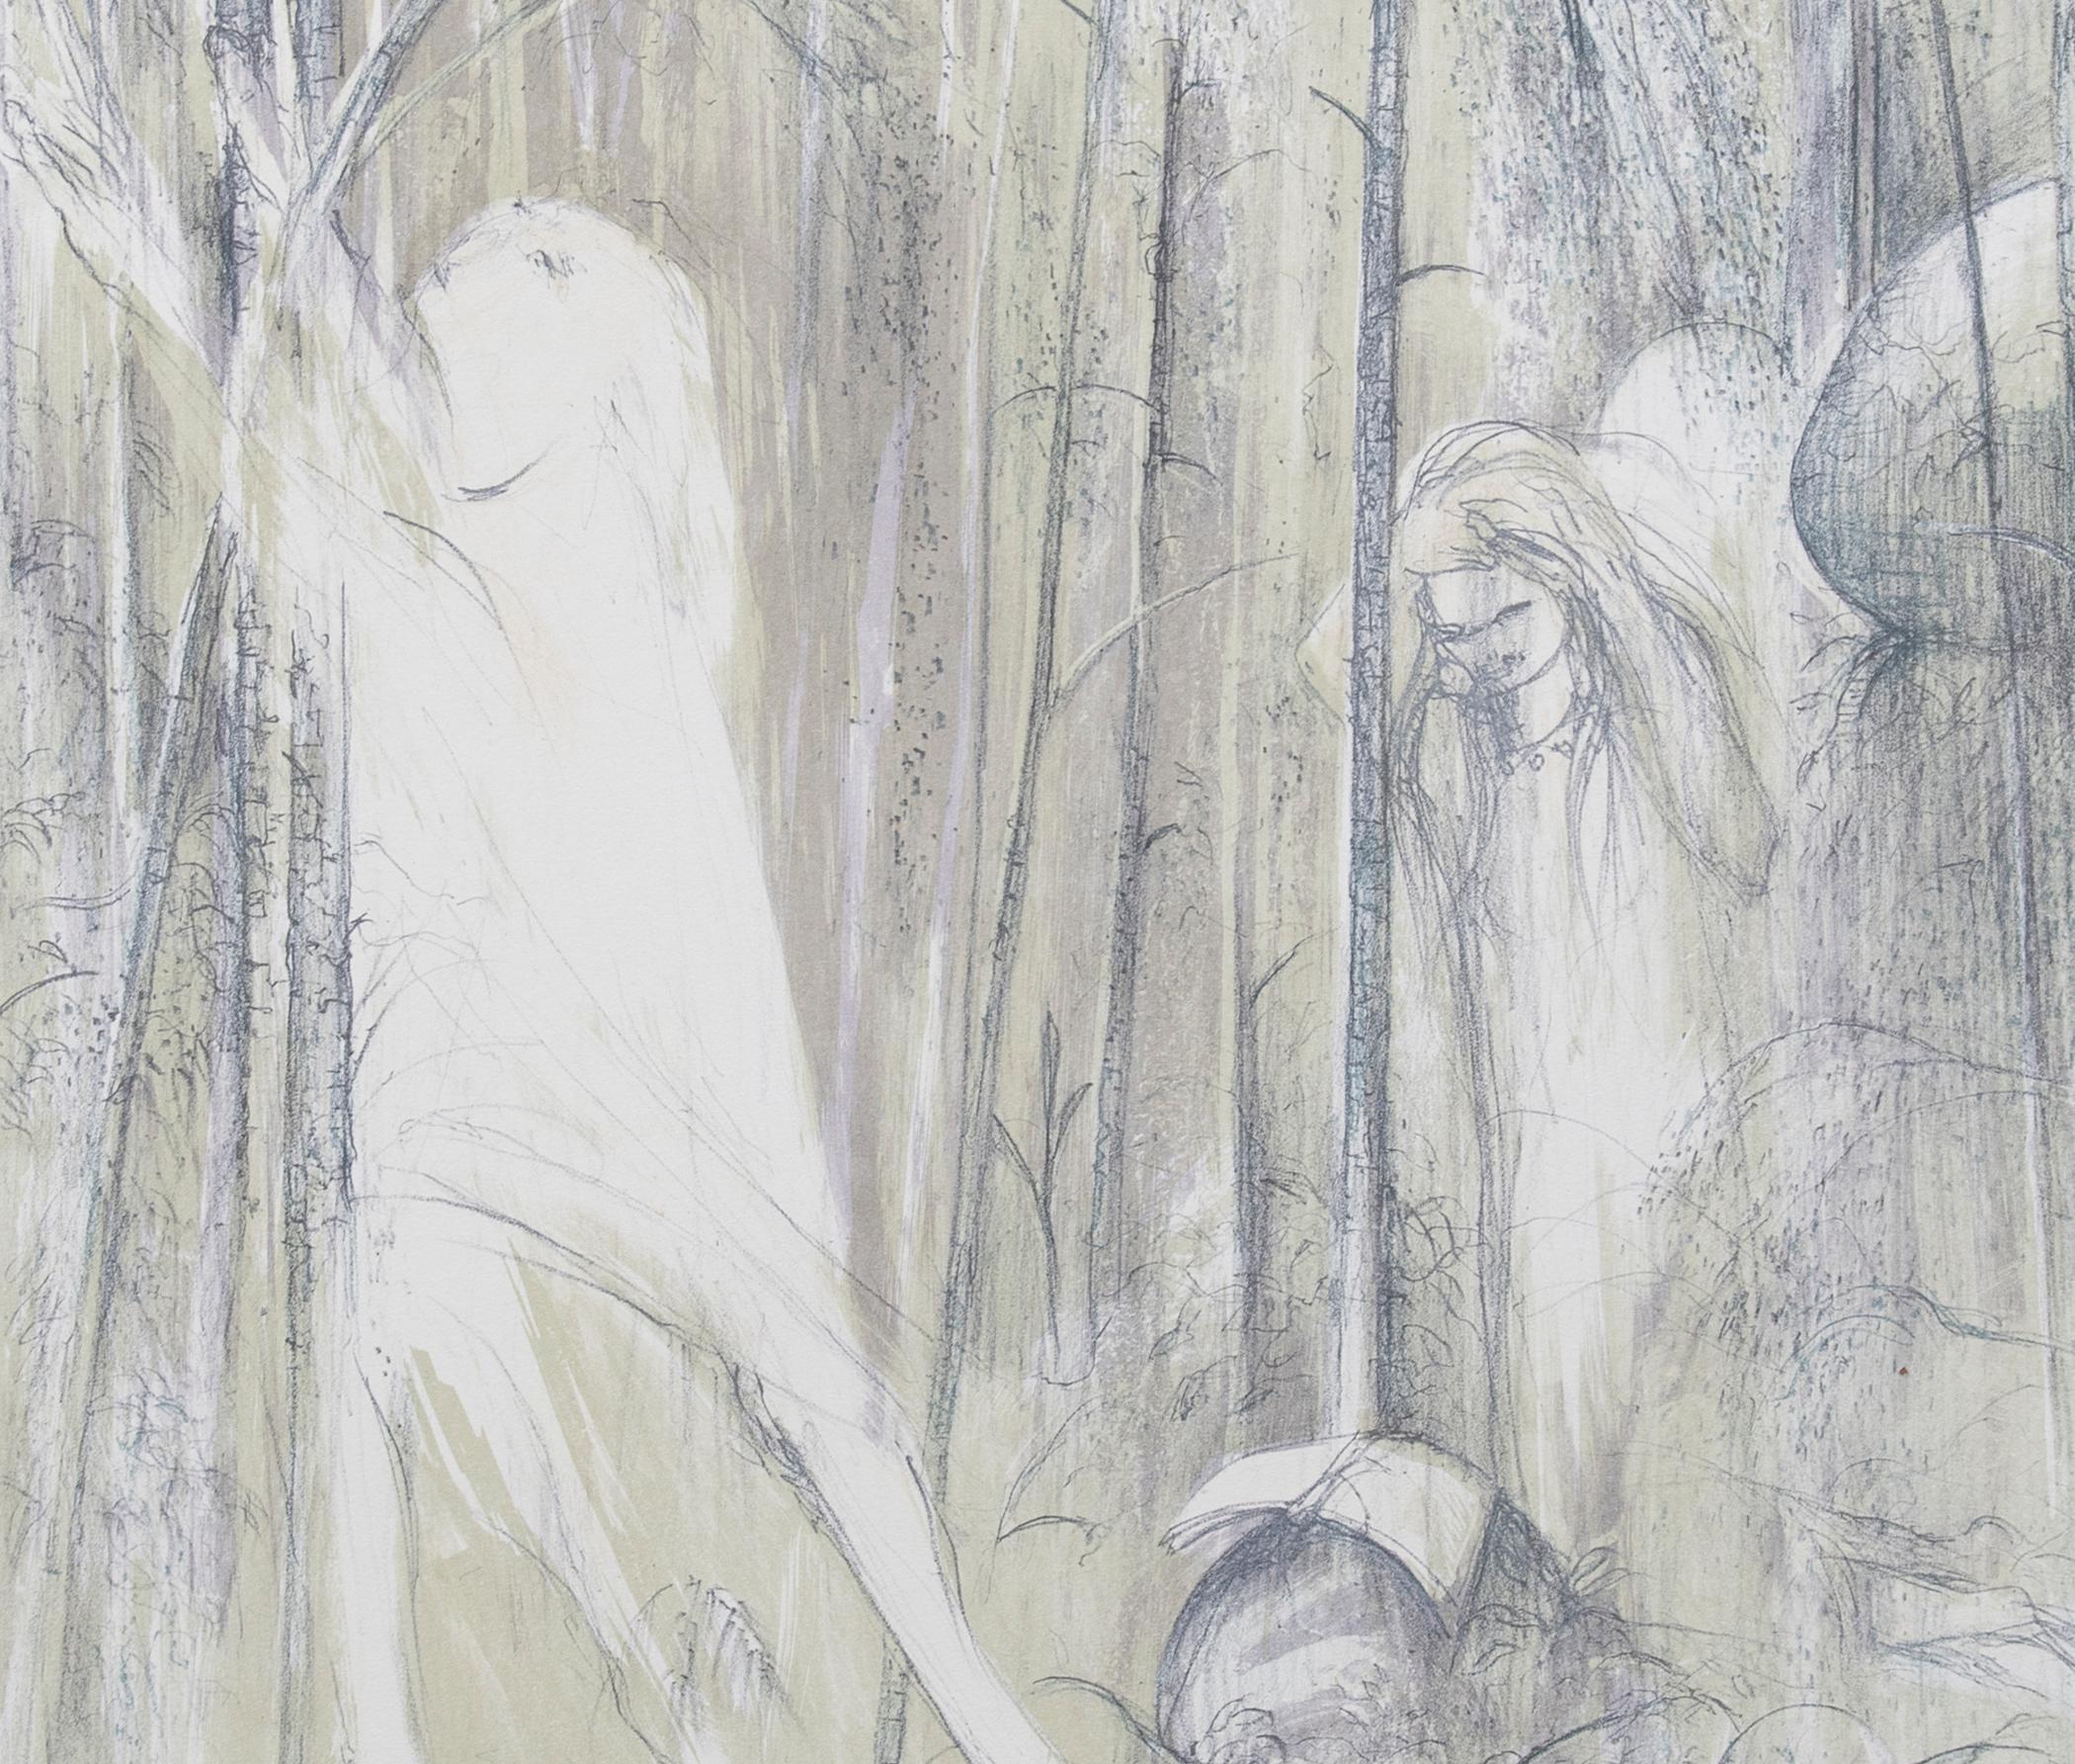 ’St Francis in the Wood’

By Arthur Boyd
Medium - Lithograph
Signed - Yes
Edition - Artist Proof
Size - 740mm x 500mm
Date - 1979
Condition - 9
Colour of print may not be accurate when viewed on a monitor.

Arthur Merric Bloomfield Boyd AC OBE (24